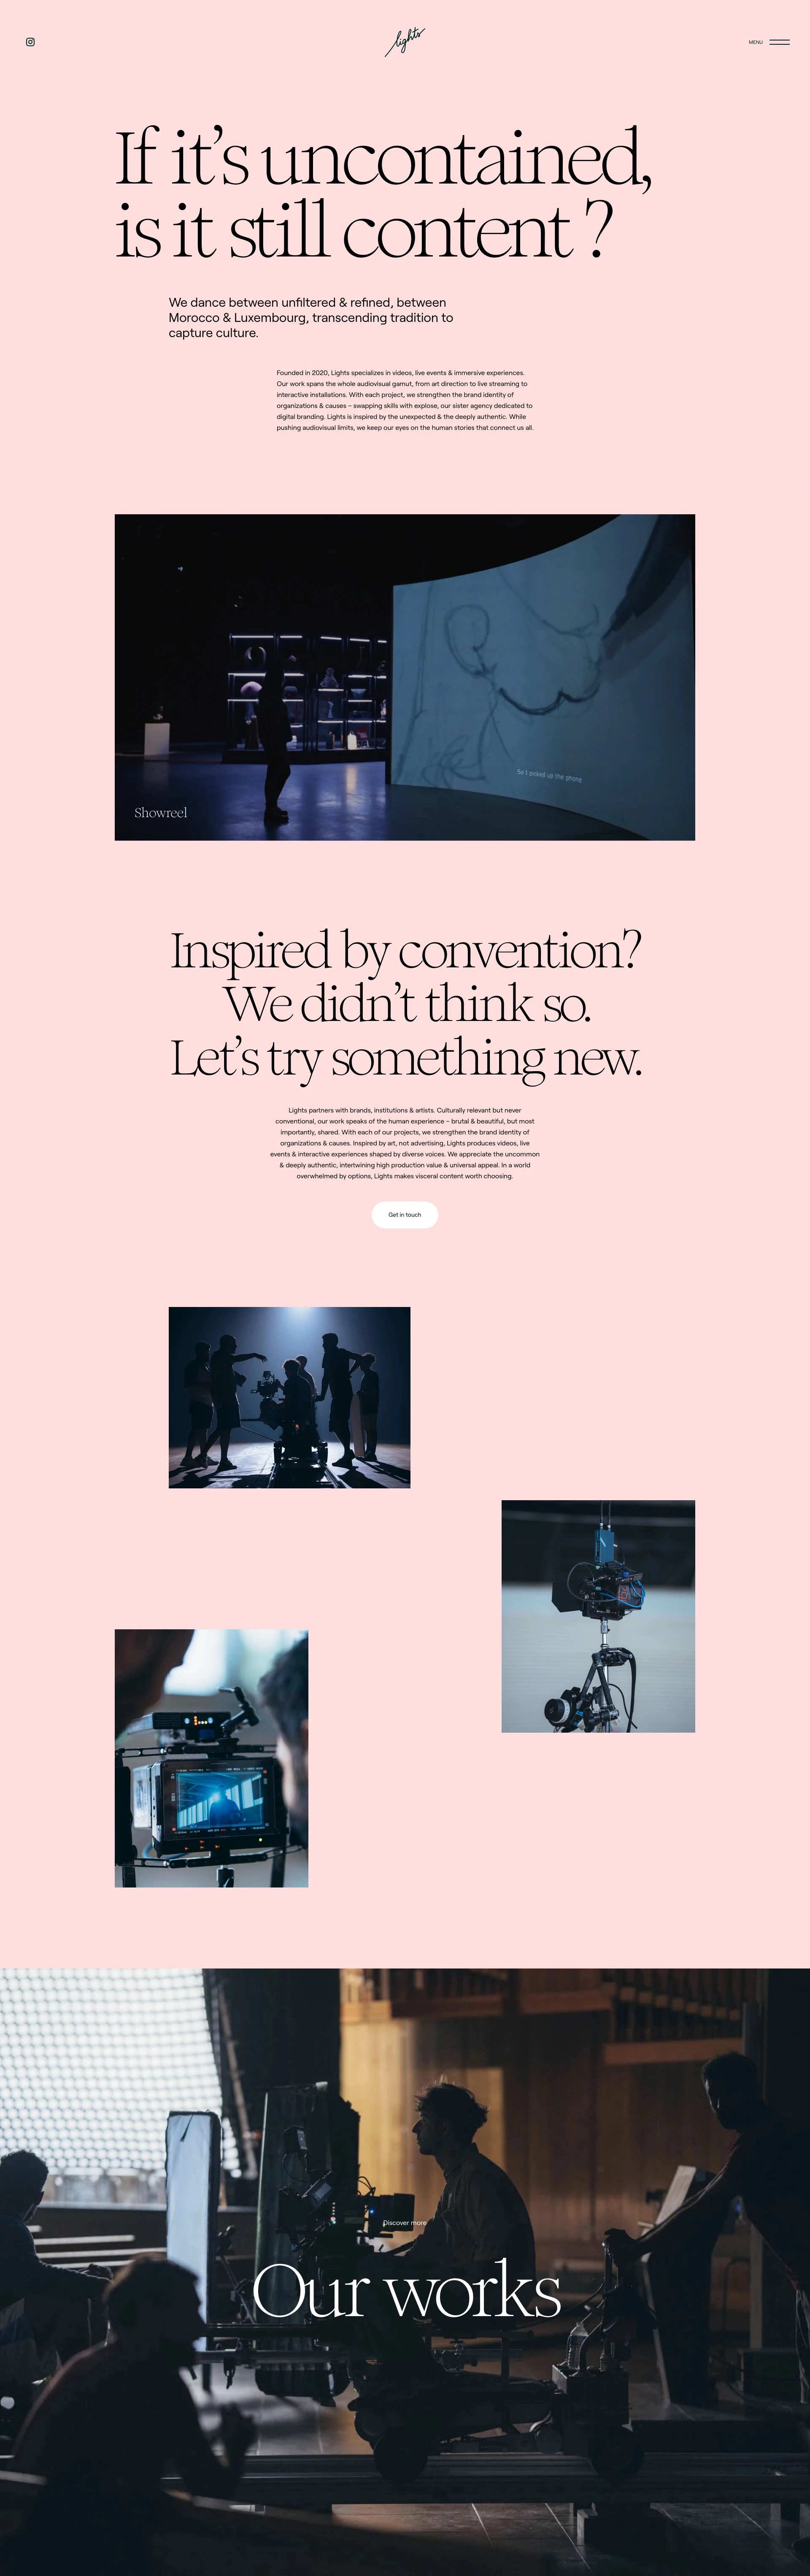 Lights Landing Page Example: Inspired by art, not advertising, Lights produces videos, live events & interactive experiences shaped by diverse voices.